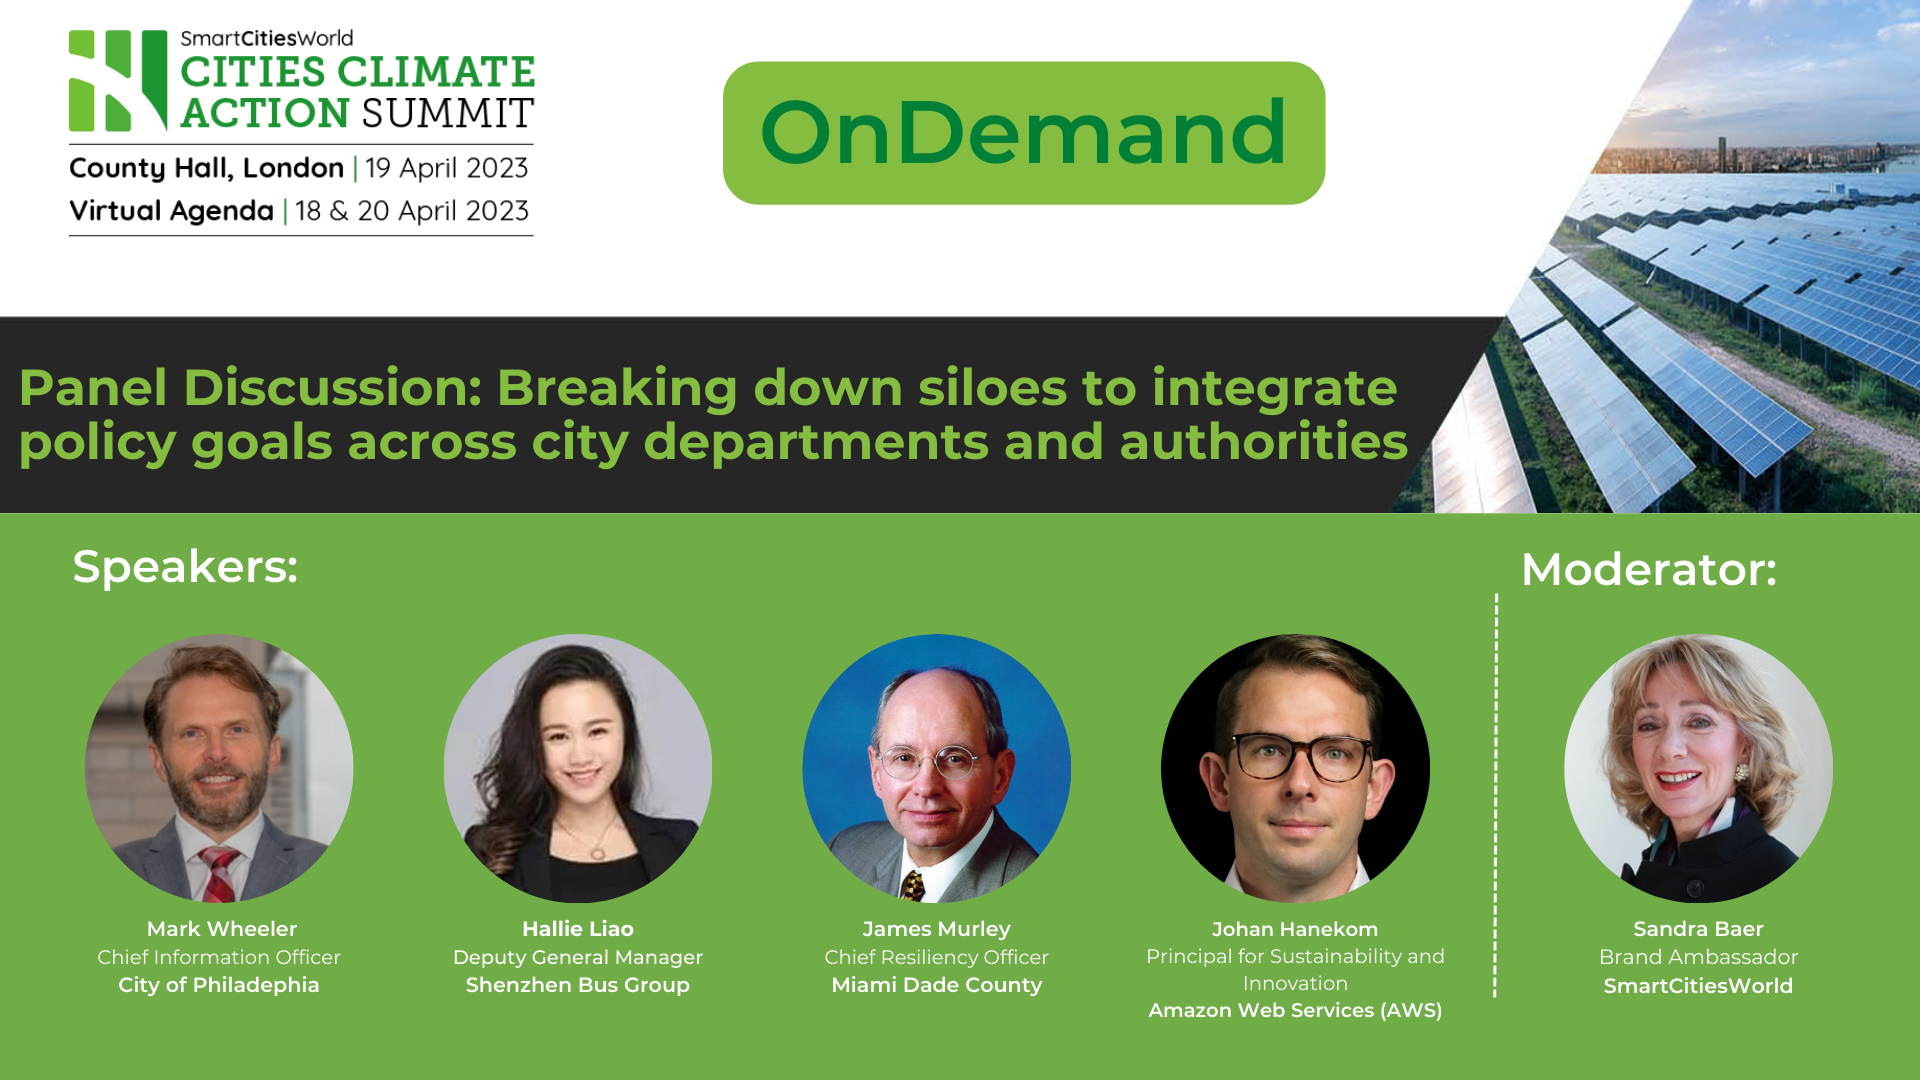 OnDemand Panel discussion: Breaking down siloes to integrate policy goals across city departments and authorities